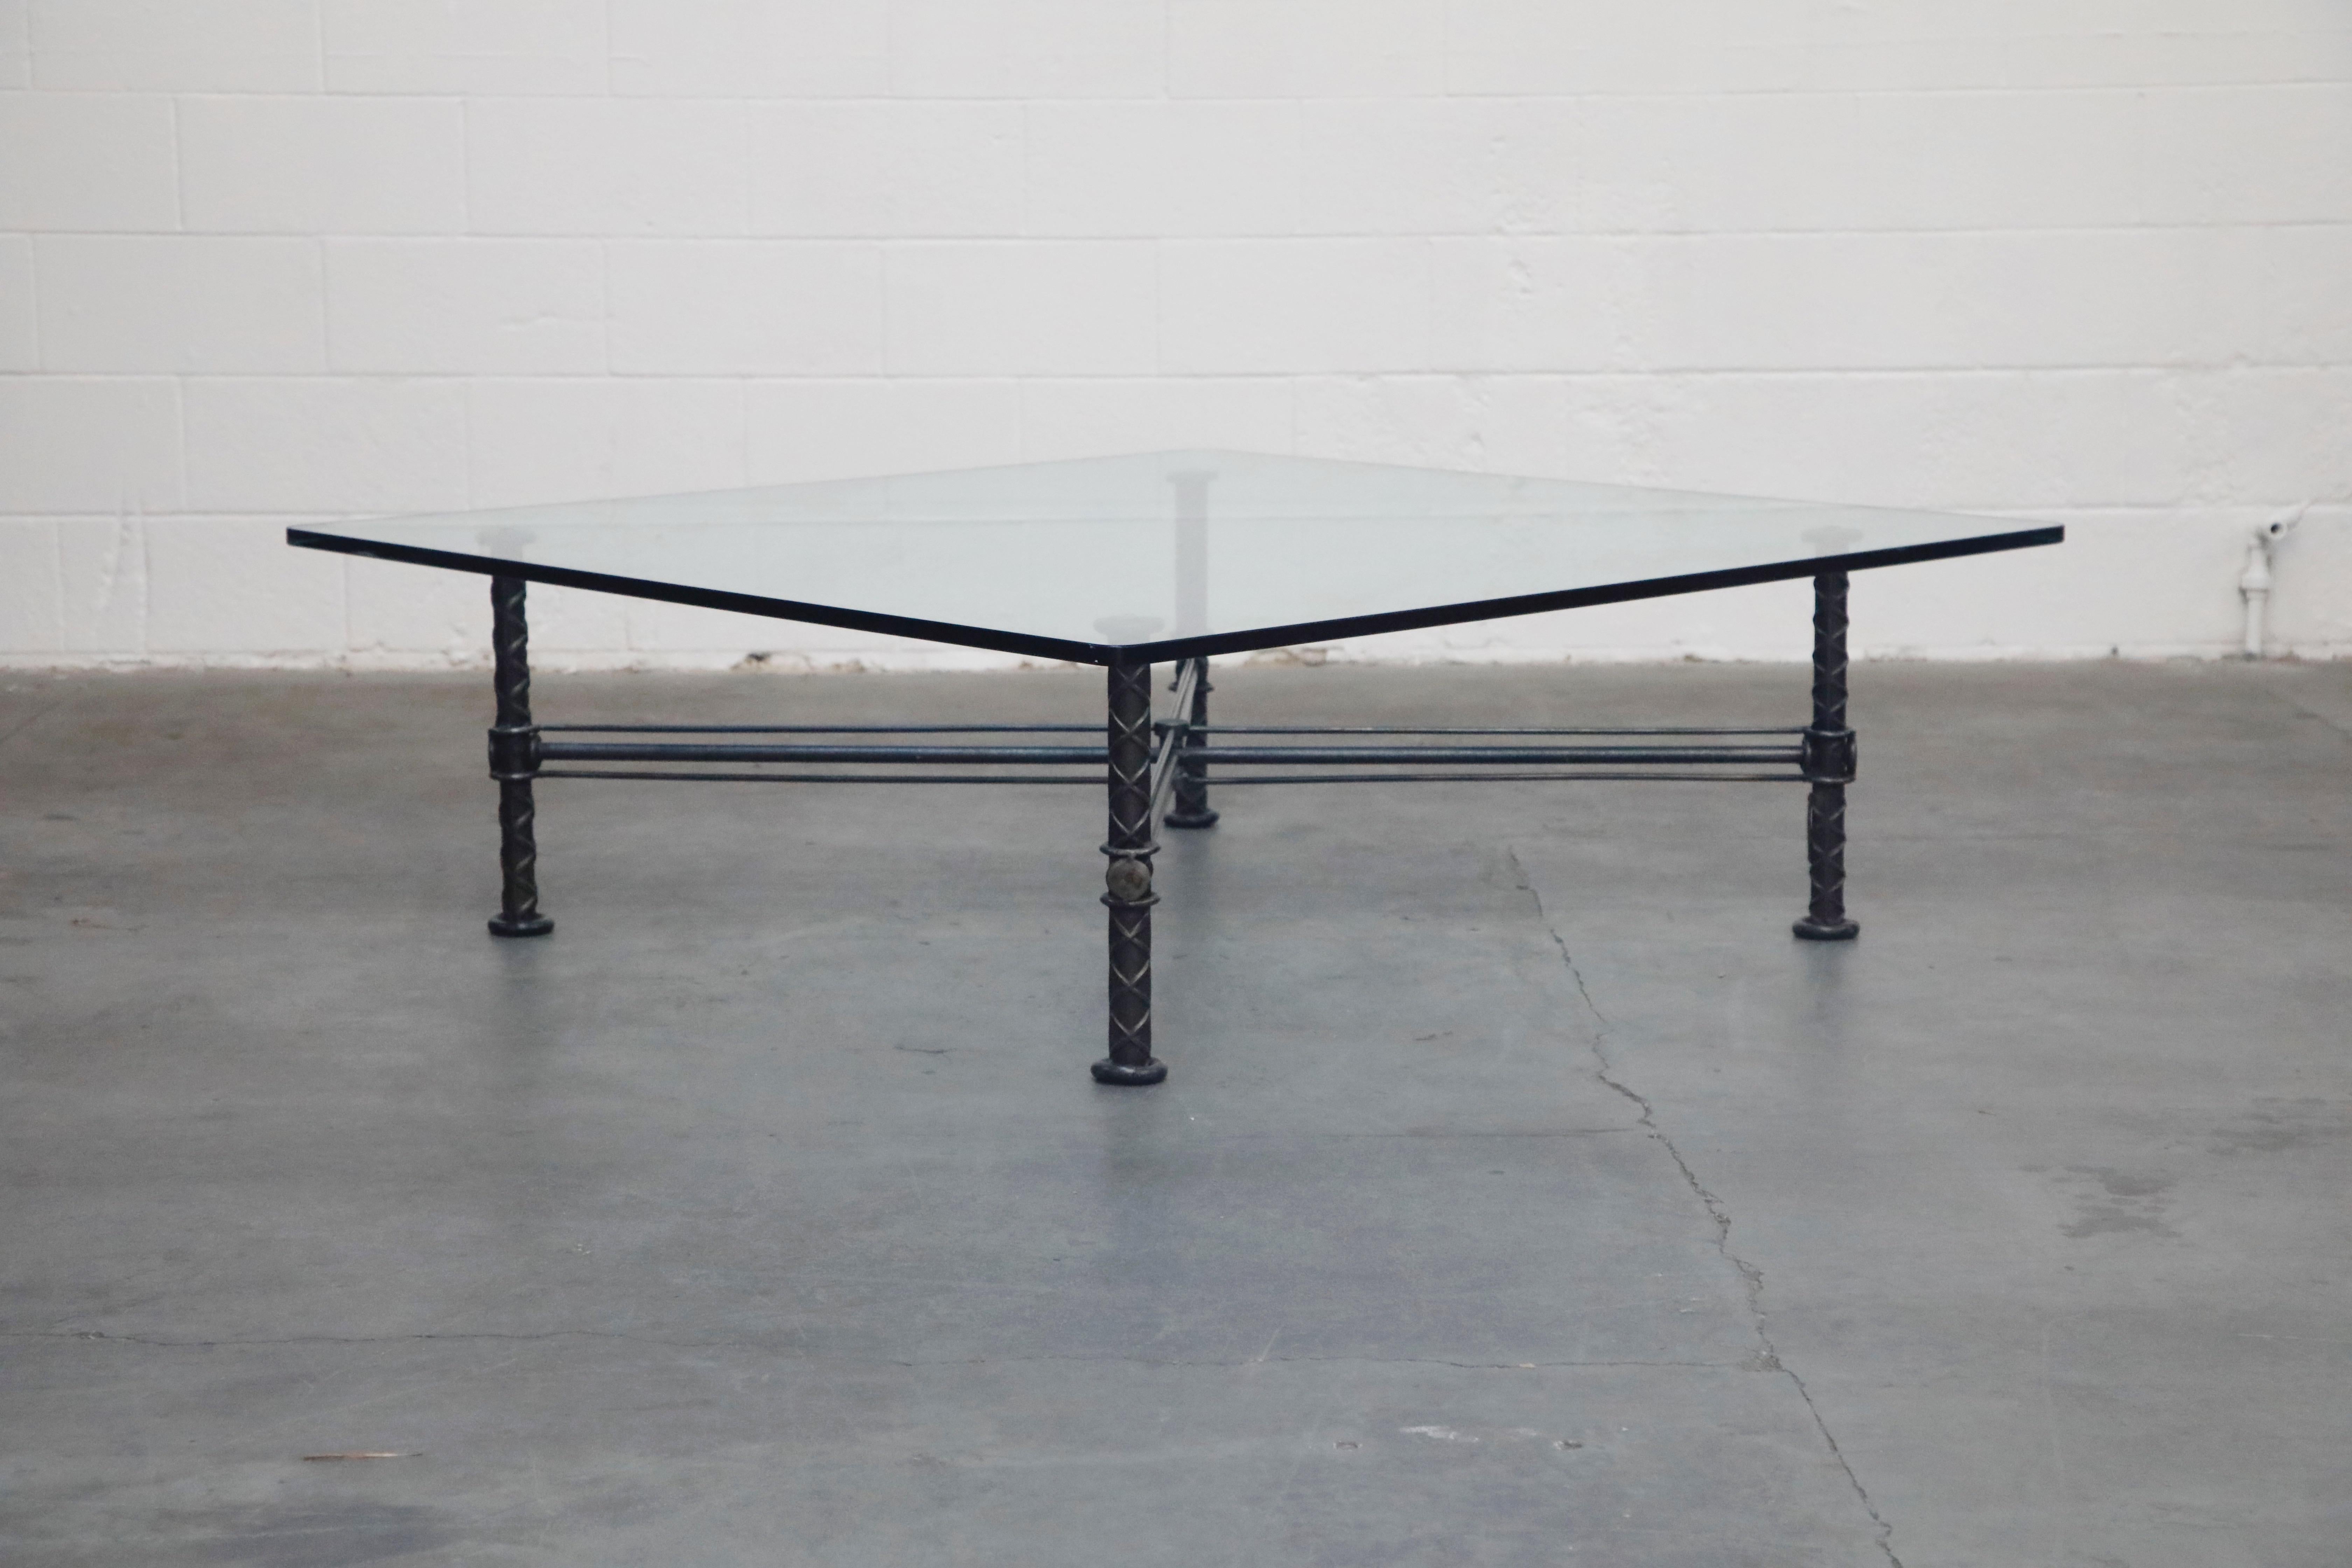 Mid-Century Modern Sculpted Steel Coffee Table by Ilana Goor, Signed and Numbered Edition